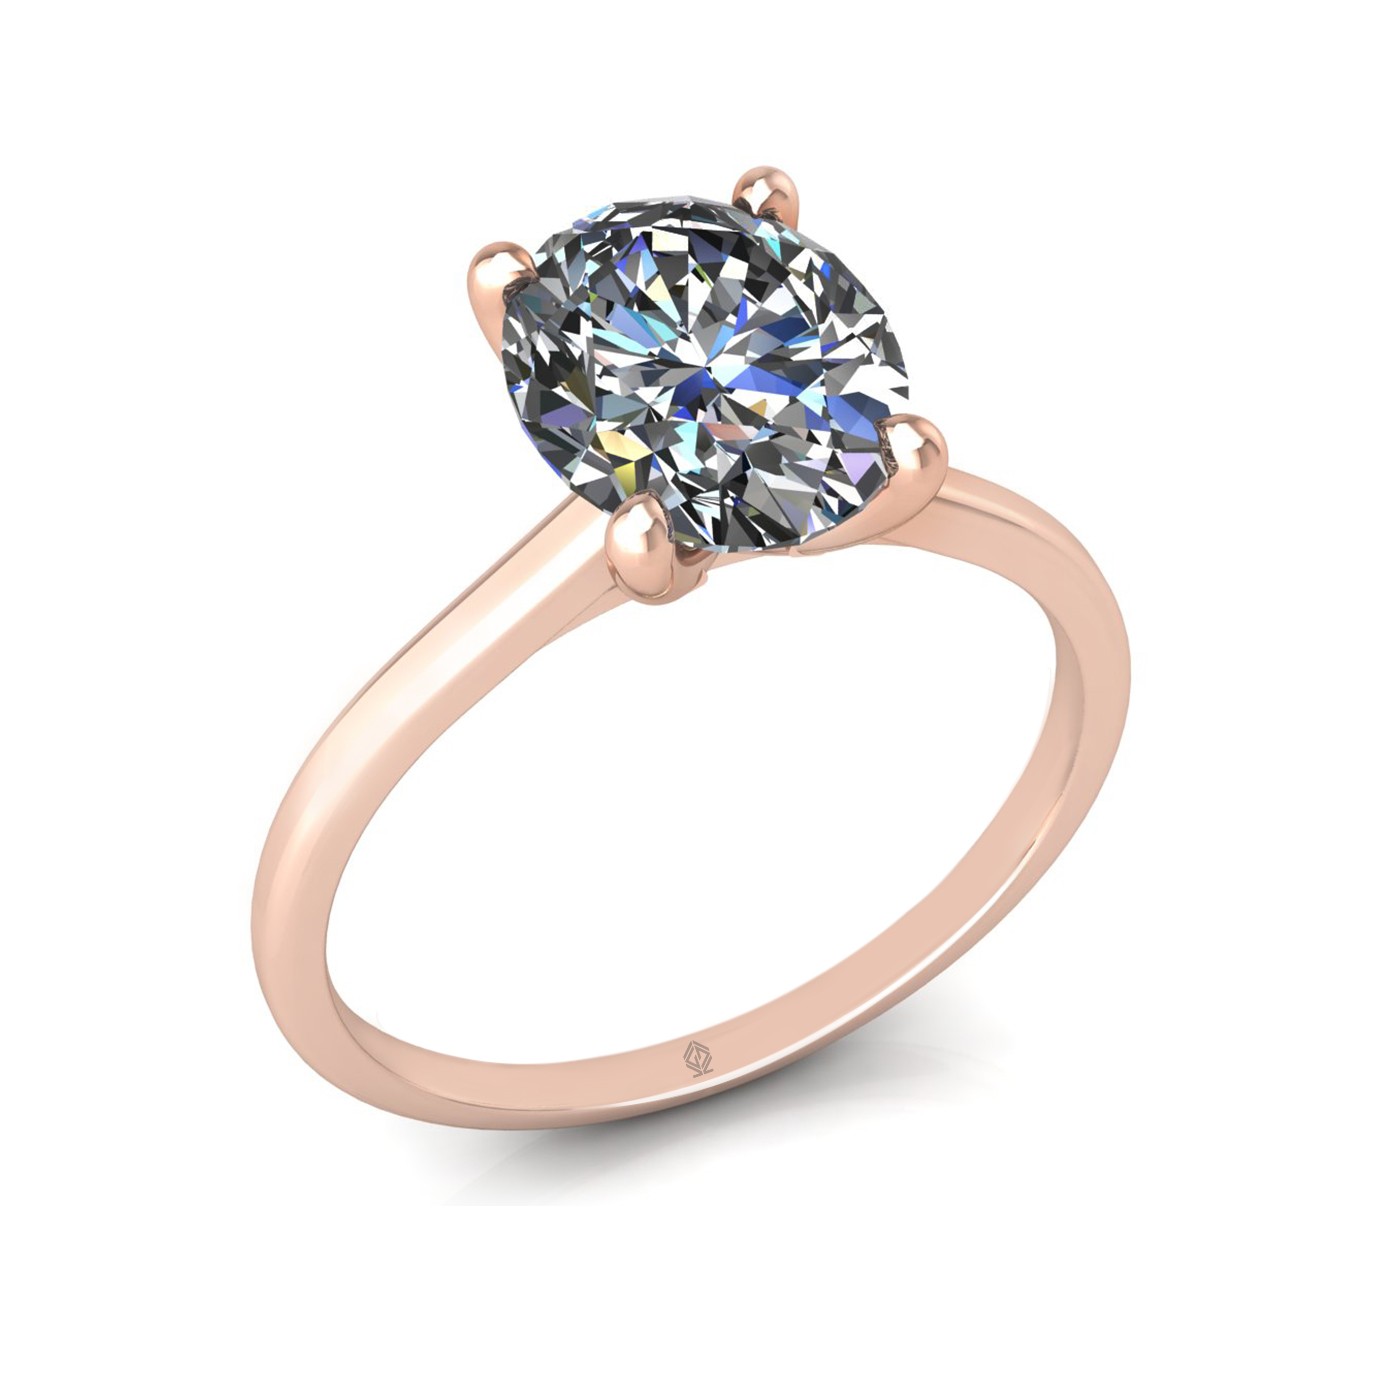 18k rose gold  2,00 ct 4 prongs solitaire oval cut diamond engagement ring with whisper thin band